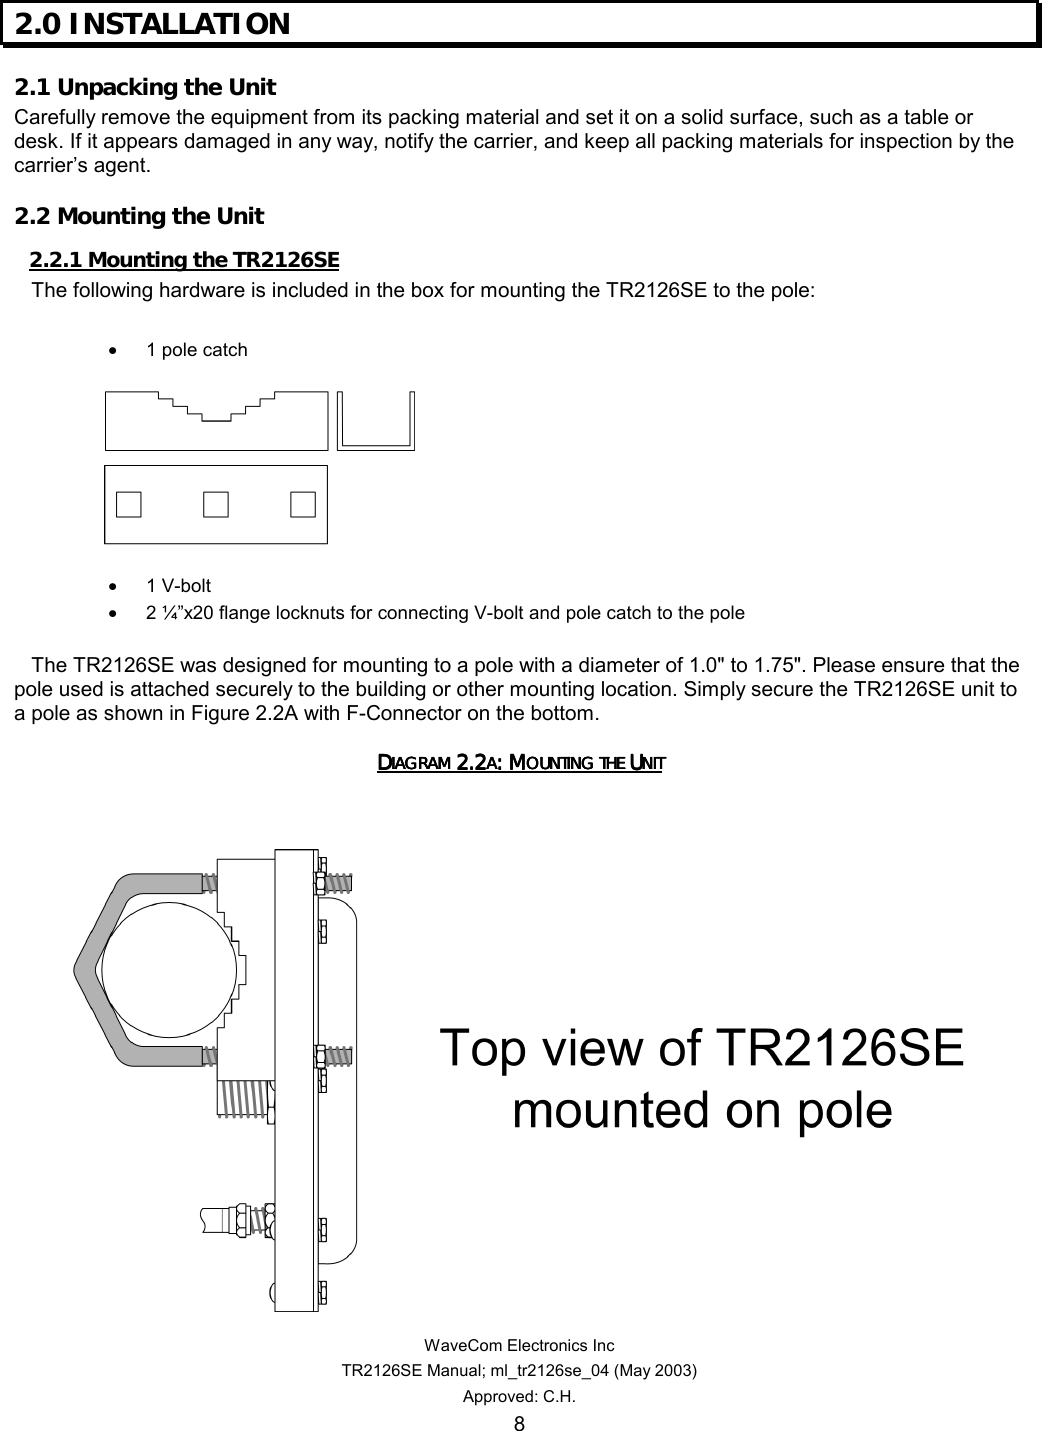   WaveCom Electronics Inc TR2126SE Manual; ml_tr2126se_04 (May 2003) Approved: C.H. 8 2.0 INSTALLATION  2.1 Unpacking the Unit  Carefully remove the equipment from its packing material and set it on a solid surface, such as a table or desk. If it appears damaged in any way, notify the carrier, and keep all packing materials for inspection by the carrier’s agent. 2.2 Mounting the Unit  2.2.1 Mounting the TR2126SE      The following hardware is included in the box for mounting the TR2126SE to the pole:  • 1 pole catch    • 1 V-bolt • 2 ¼”x20 flange locknuts for connecting V-bolt and pole catch to the pole      The TR2126SE was designed for mounting to a pole with a diameter of 1.0&quot; to 1.75&quot;. Please ensure that the pole used is attached securely to the building or other mounting location. Simply secure the TR2126SE unit to a pole as shown in Figure 2.2A with F-Connector on the bottom. DDDDIAGRAM IAGRAM IAGRAM IAGRAM 2.22.22.22.2AAAA: M: M: M: MOUNTING THE OUNTING THE OUNTING THE OUNTING THE UUUUNITNITNITNIT            